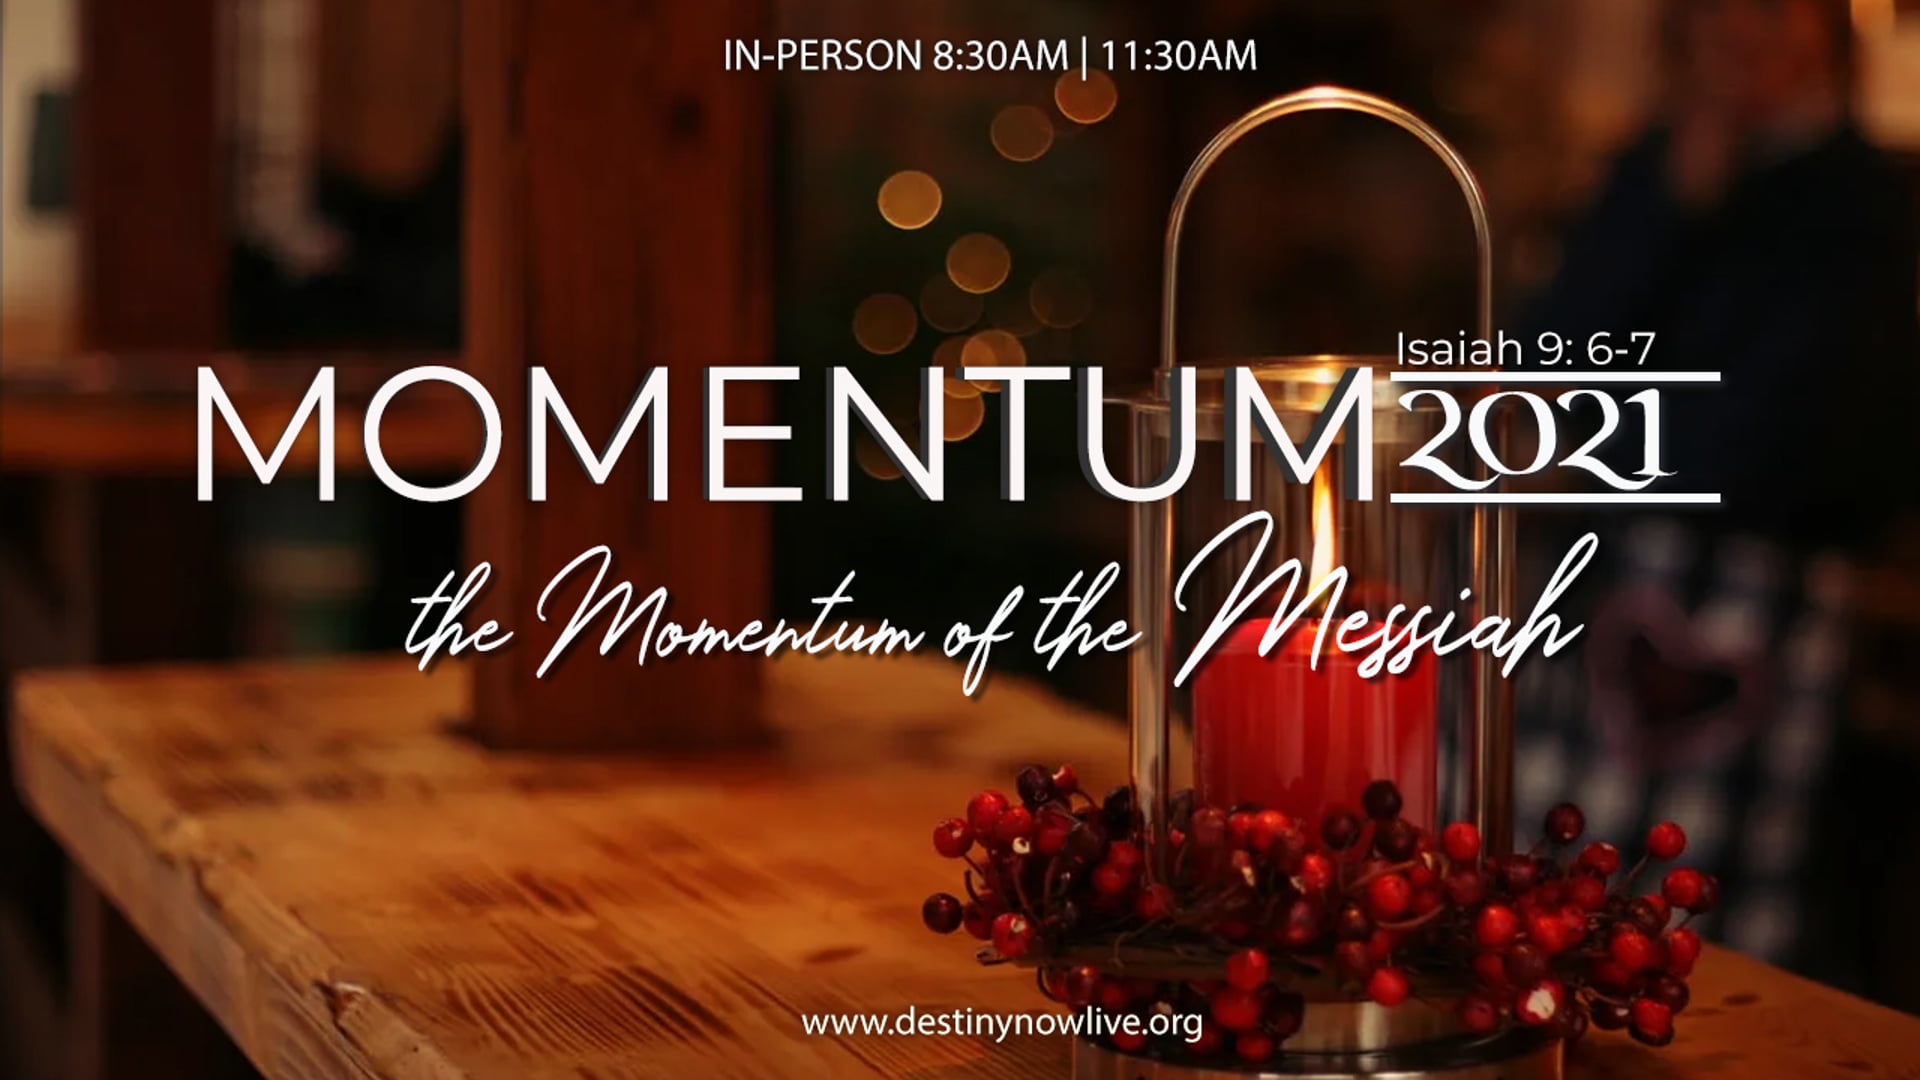 The Momentum of the Messiah